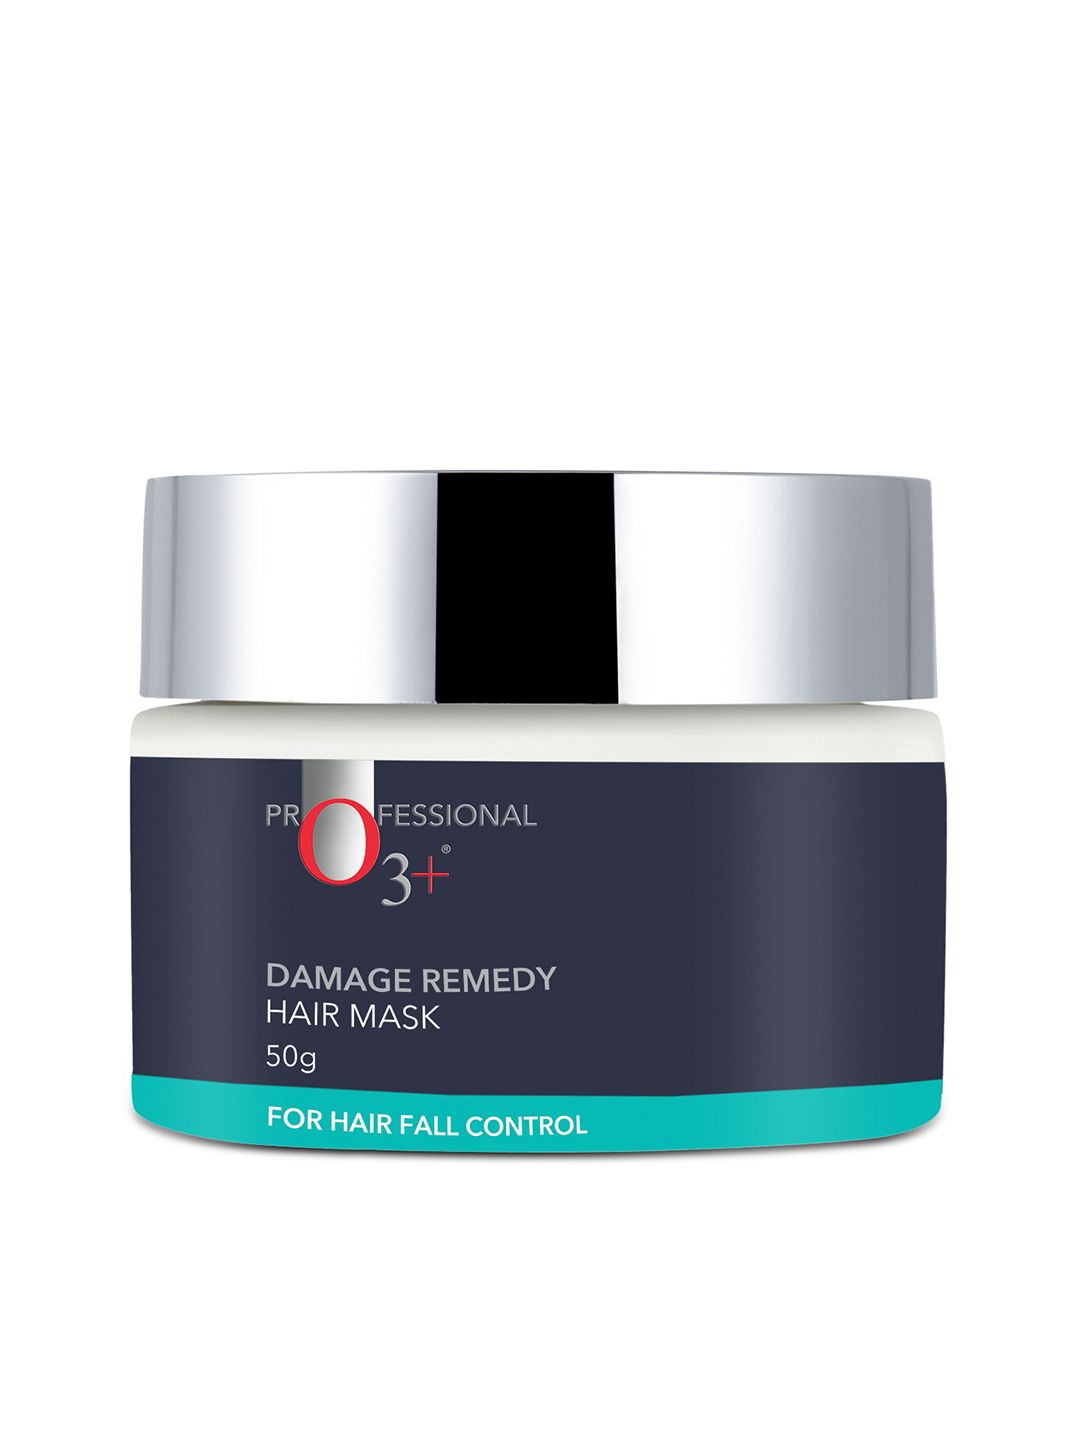 O3 Damage Remedy Hair Mask with Argan Oil & Shea for Hair Fall Control - 50 g Price in India